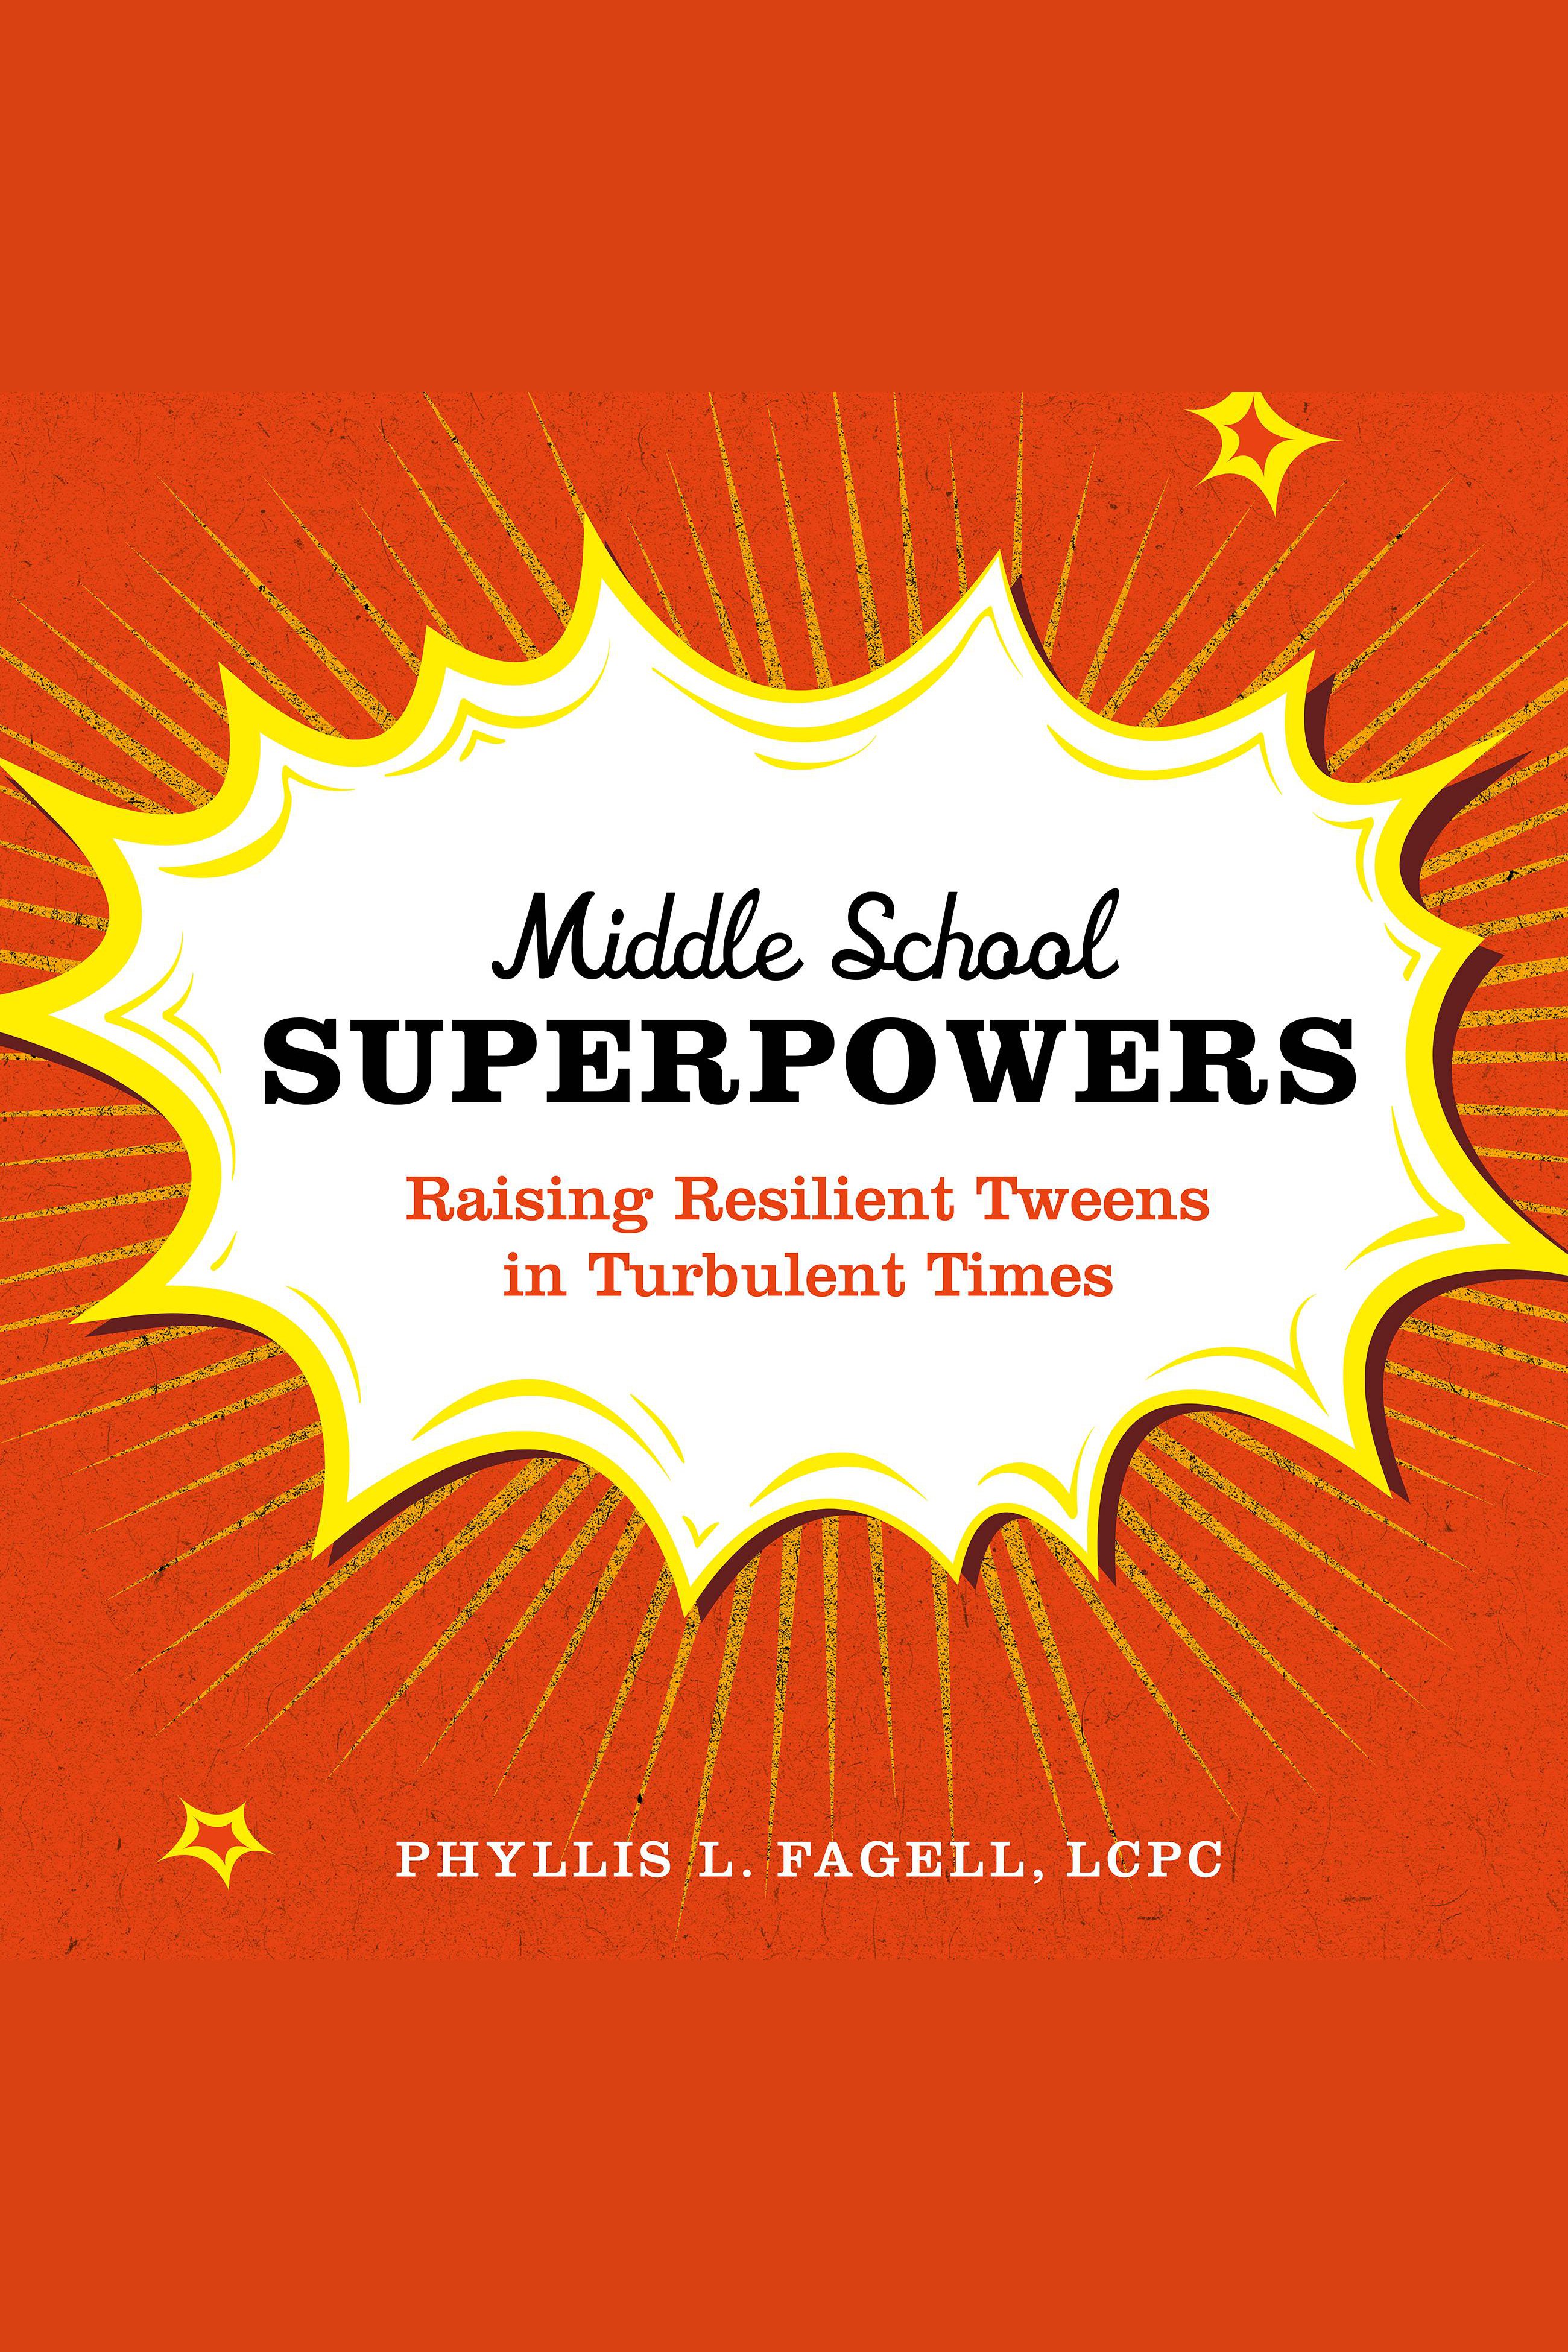 Middle School Superpowers Raising Resilient Tweens in Turbulent Times cover image